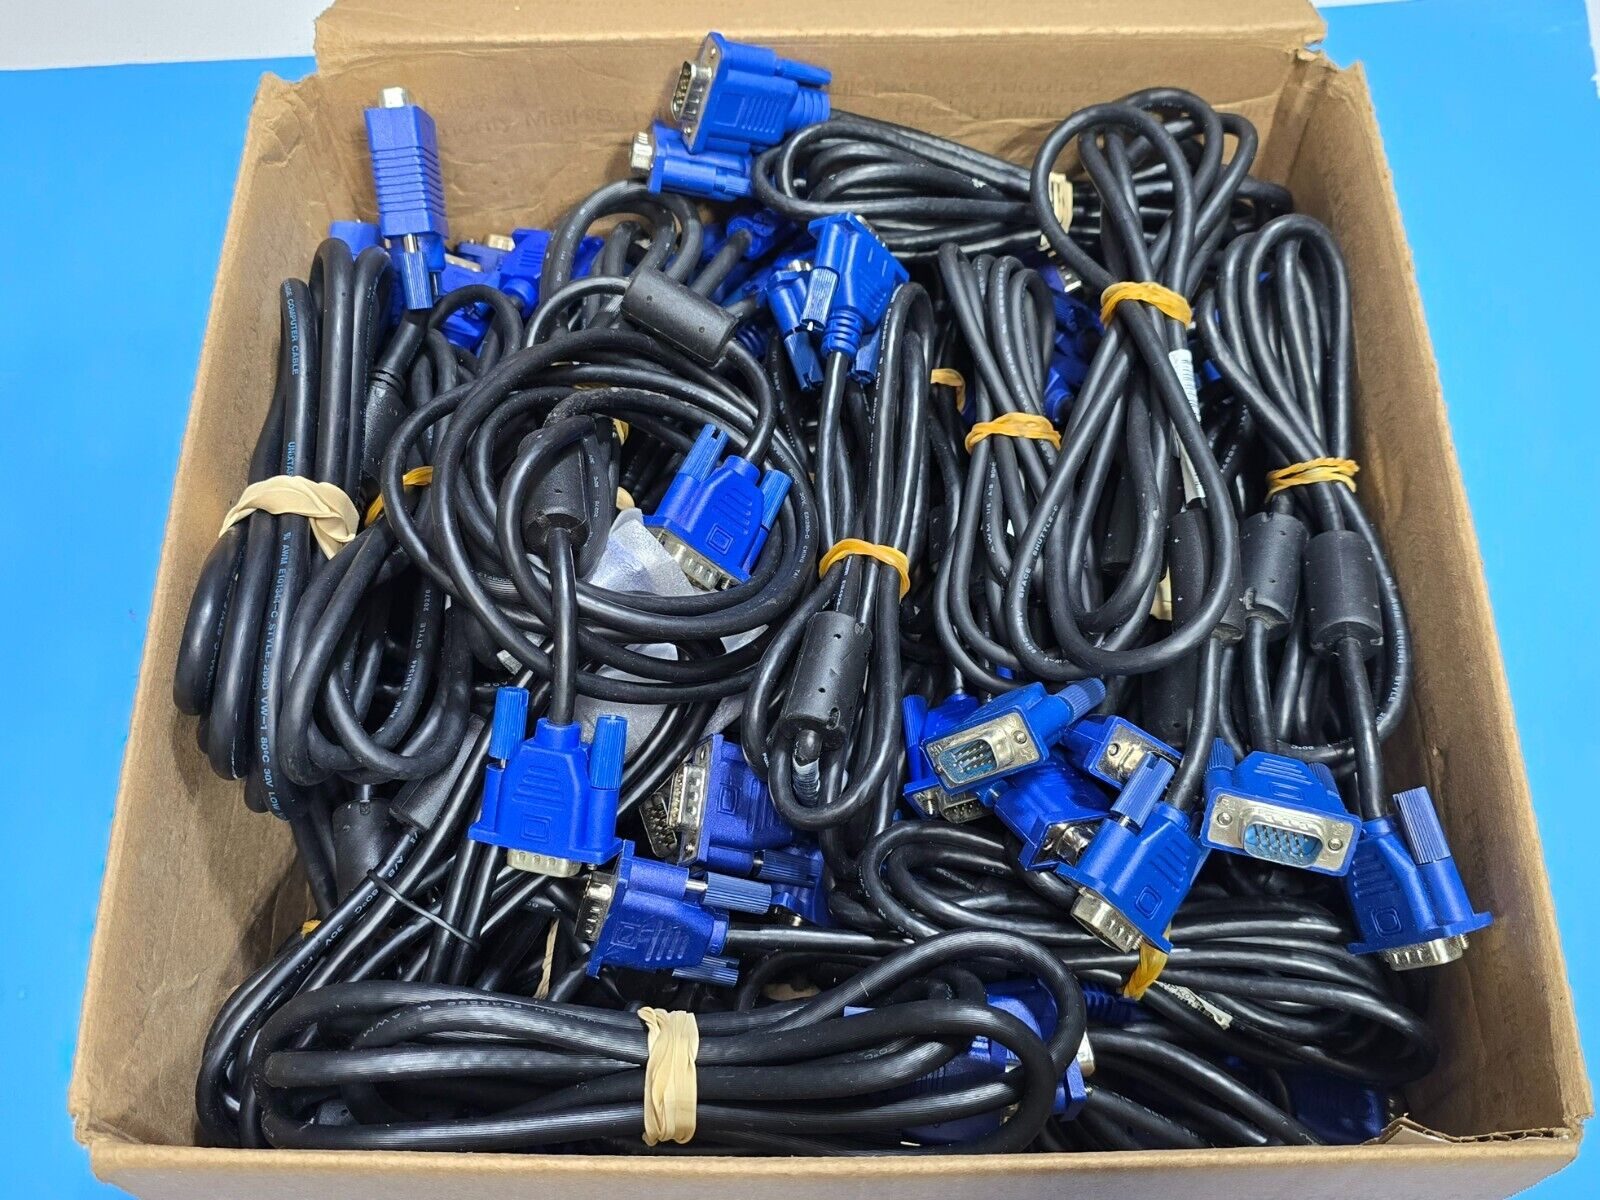 LOT of 35 SVGA SUPER VGA Monitor 15PIN Male To Male Cable CORD FOR PC TV HDTV